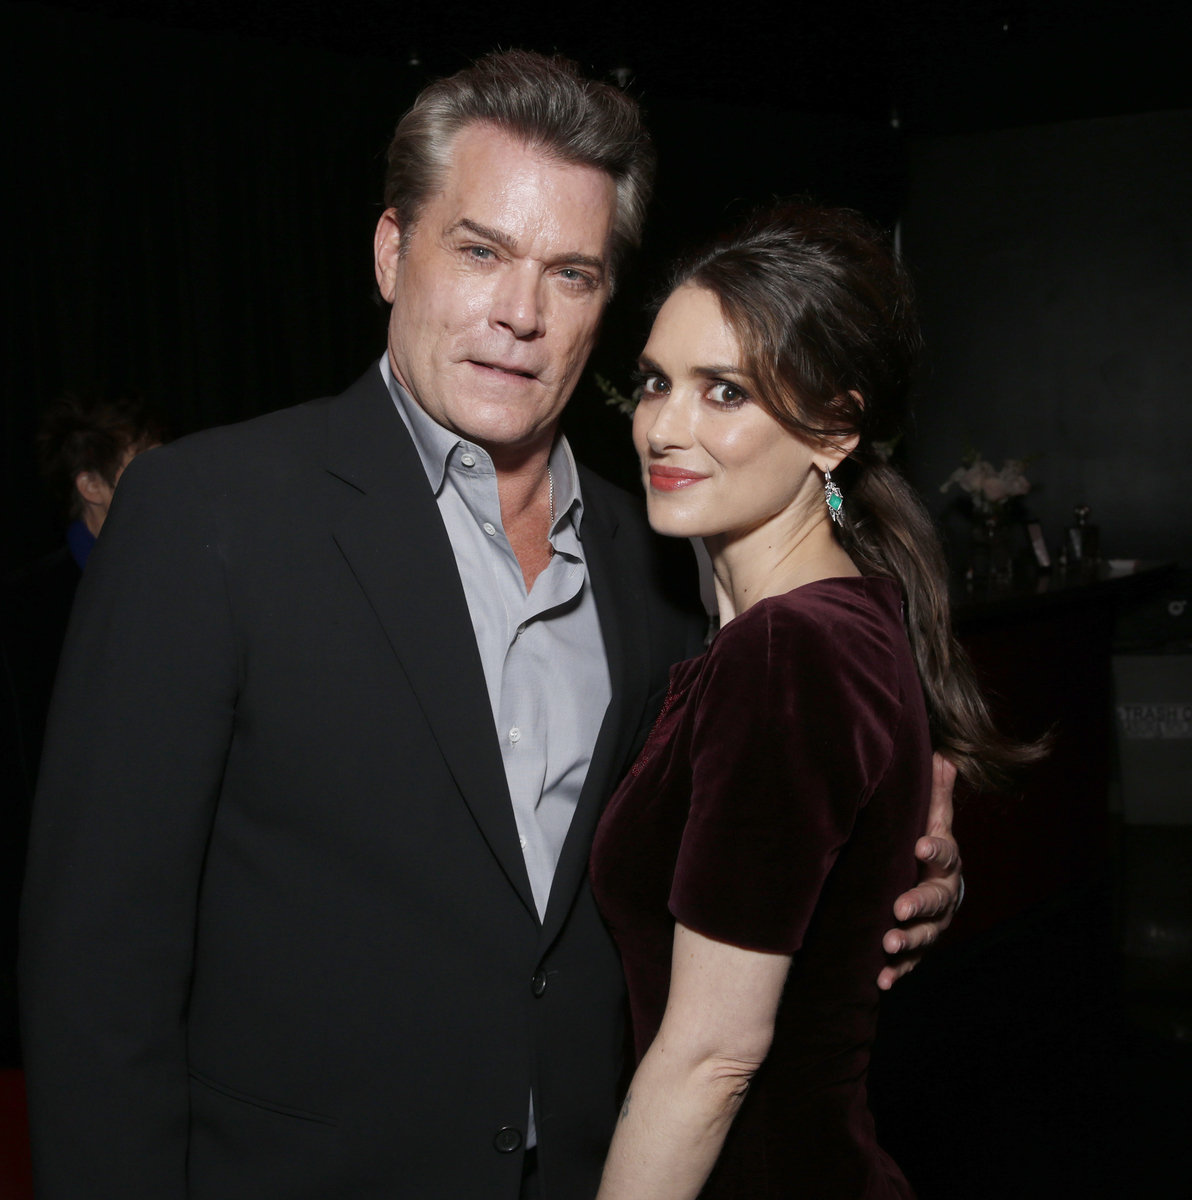 Ray Liotta & Winona Ryder attends the DeLeon Tequila Premiere of The Iceman at the Arclight on Monday, April 22, 2013 in Los Angeles. (Photo by Todd Williamson/Invision for Millennium/AP)